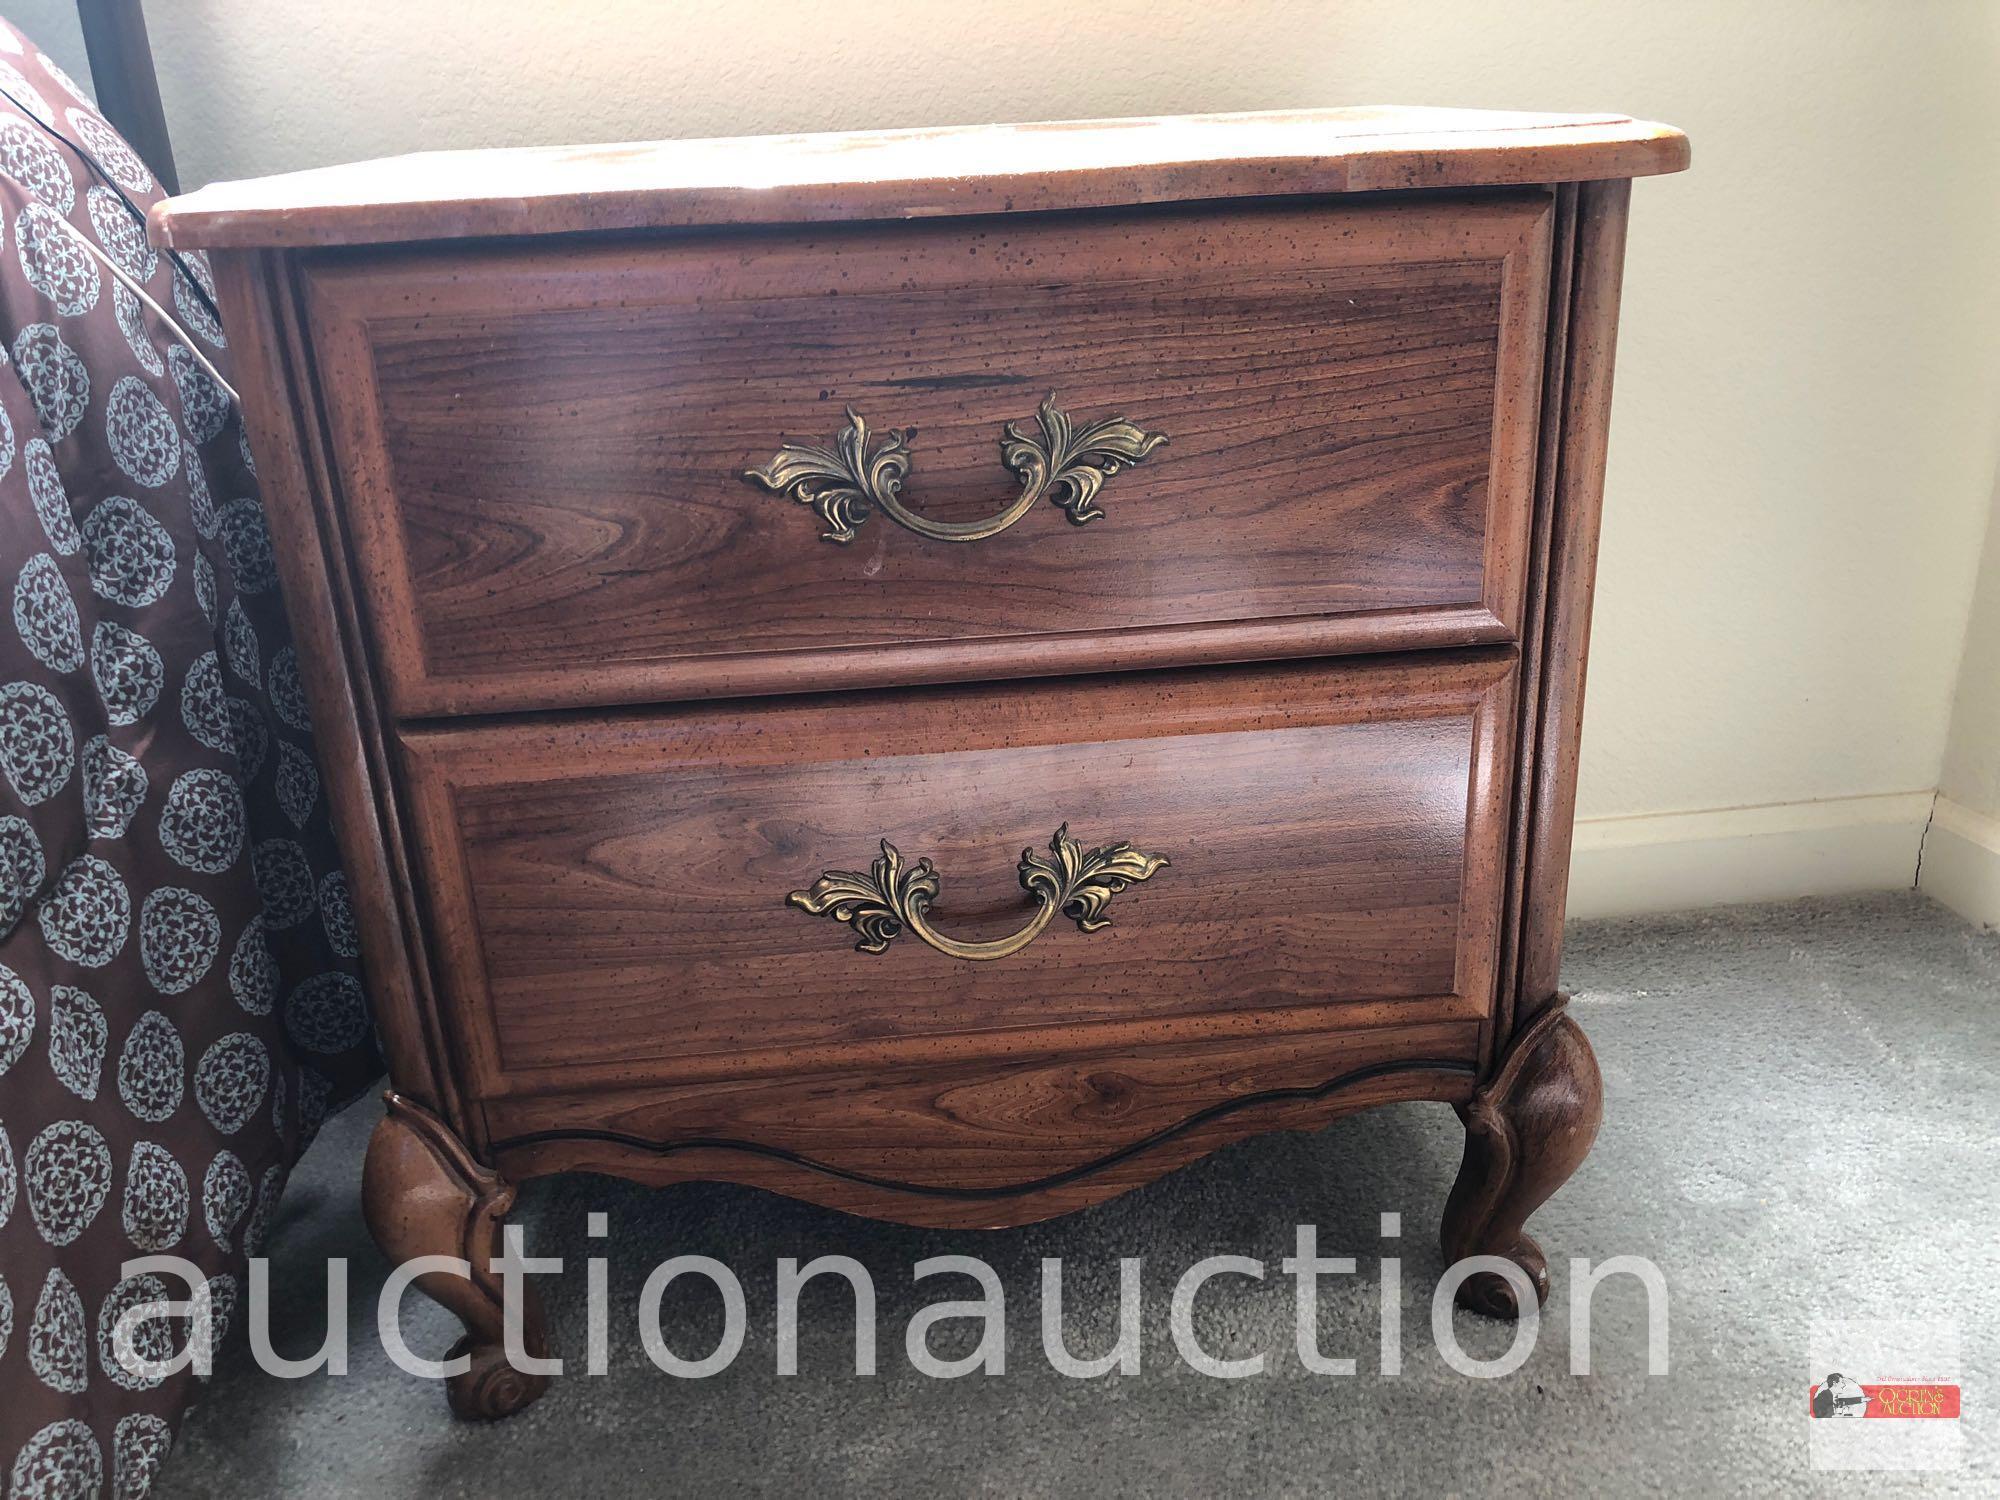 Furniture - Nightstand, matches dresser Lot 25 and other nightstand Lot 58, 24"wx23"hx15"d